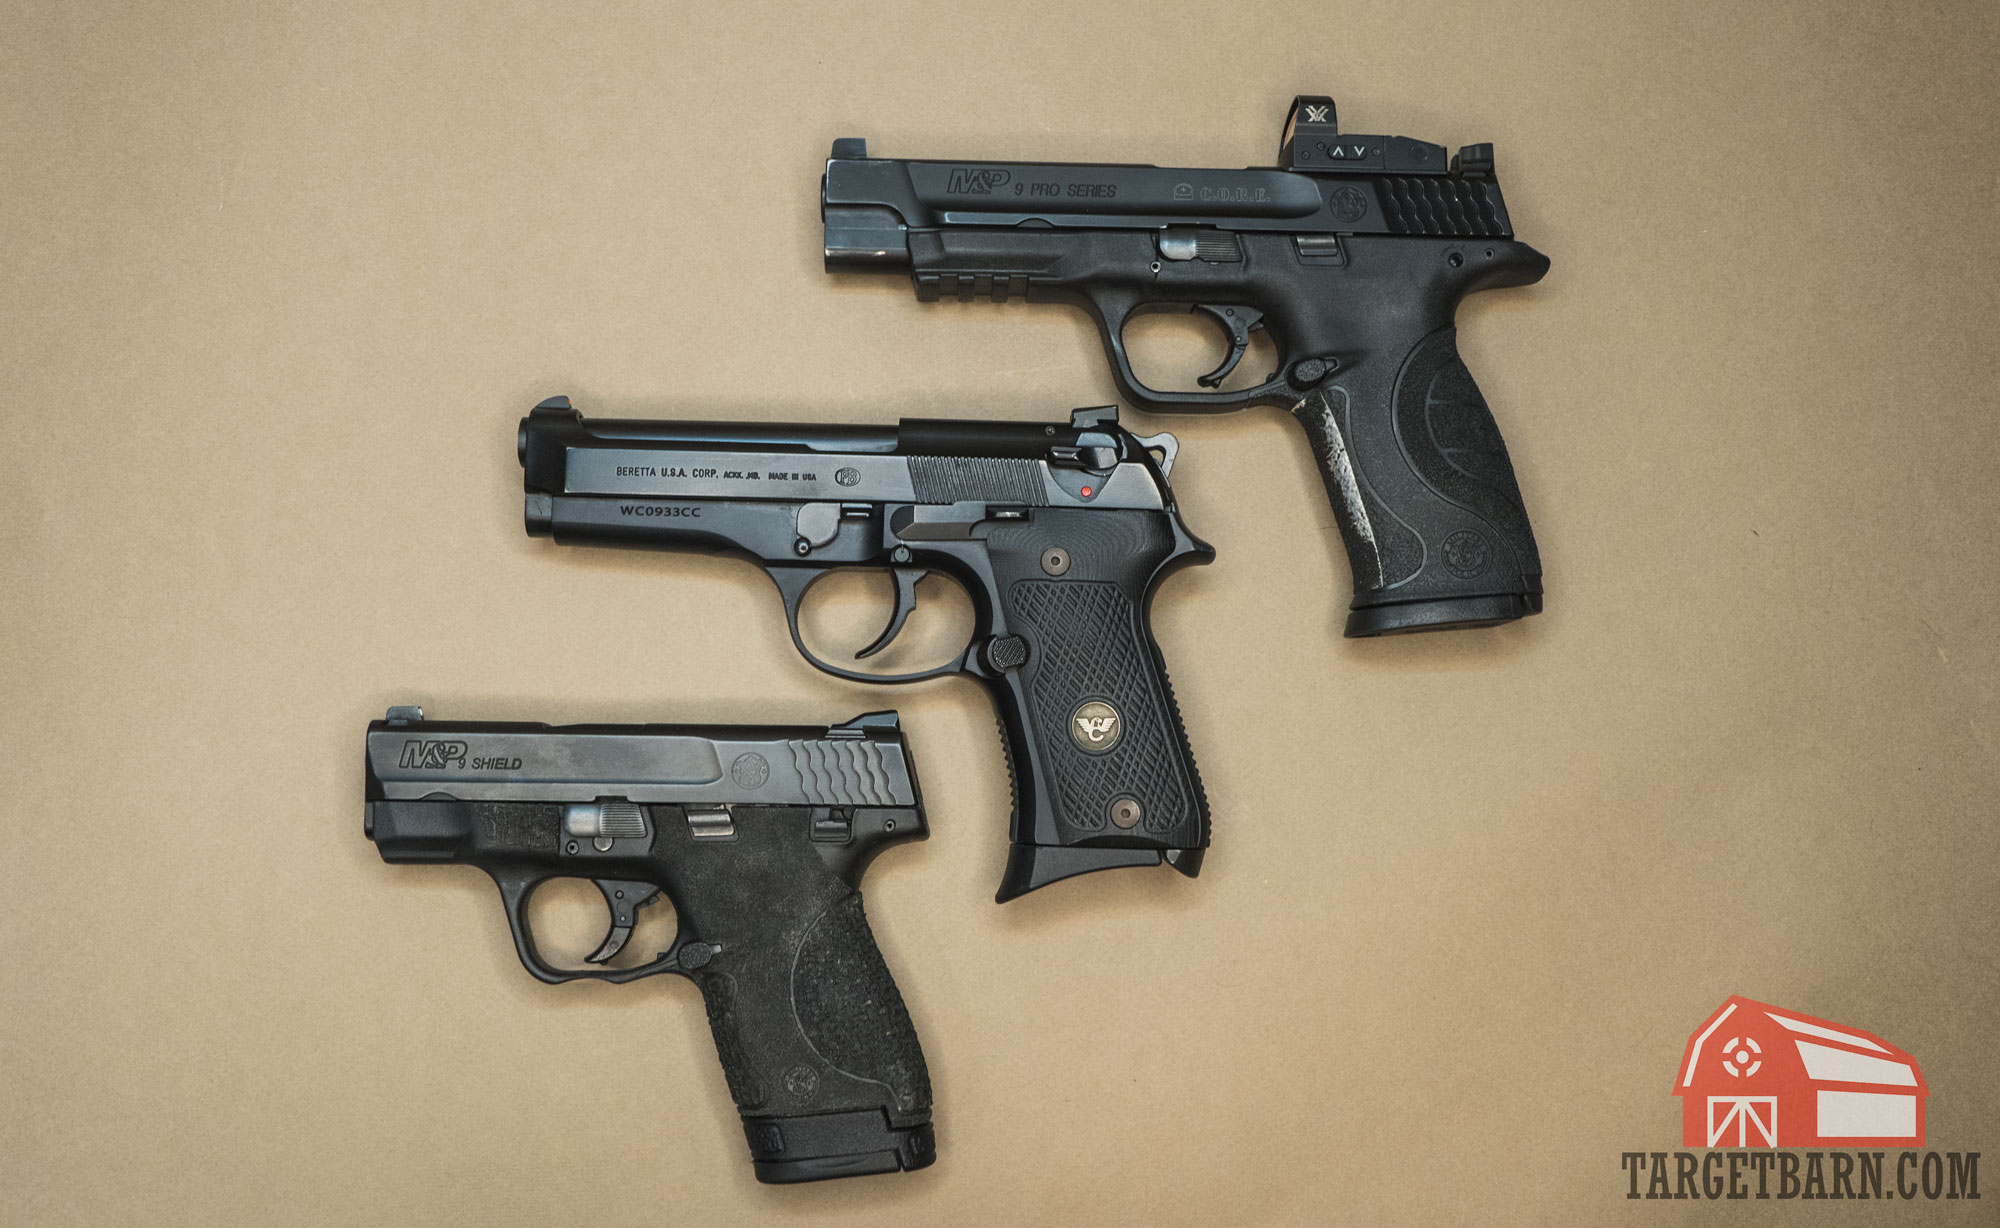 showing subcompact, compact, and full handgun sizes